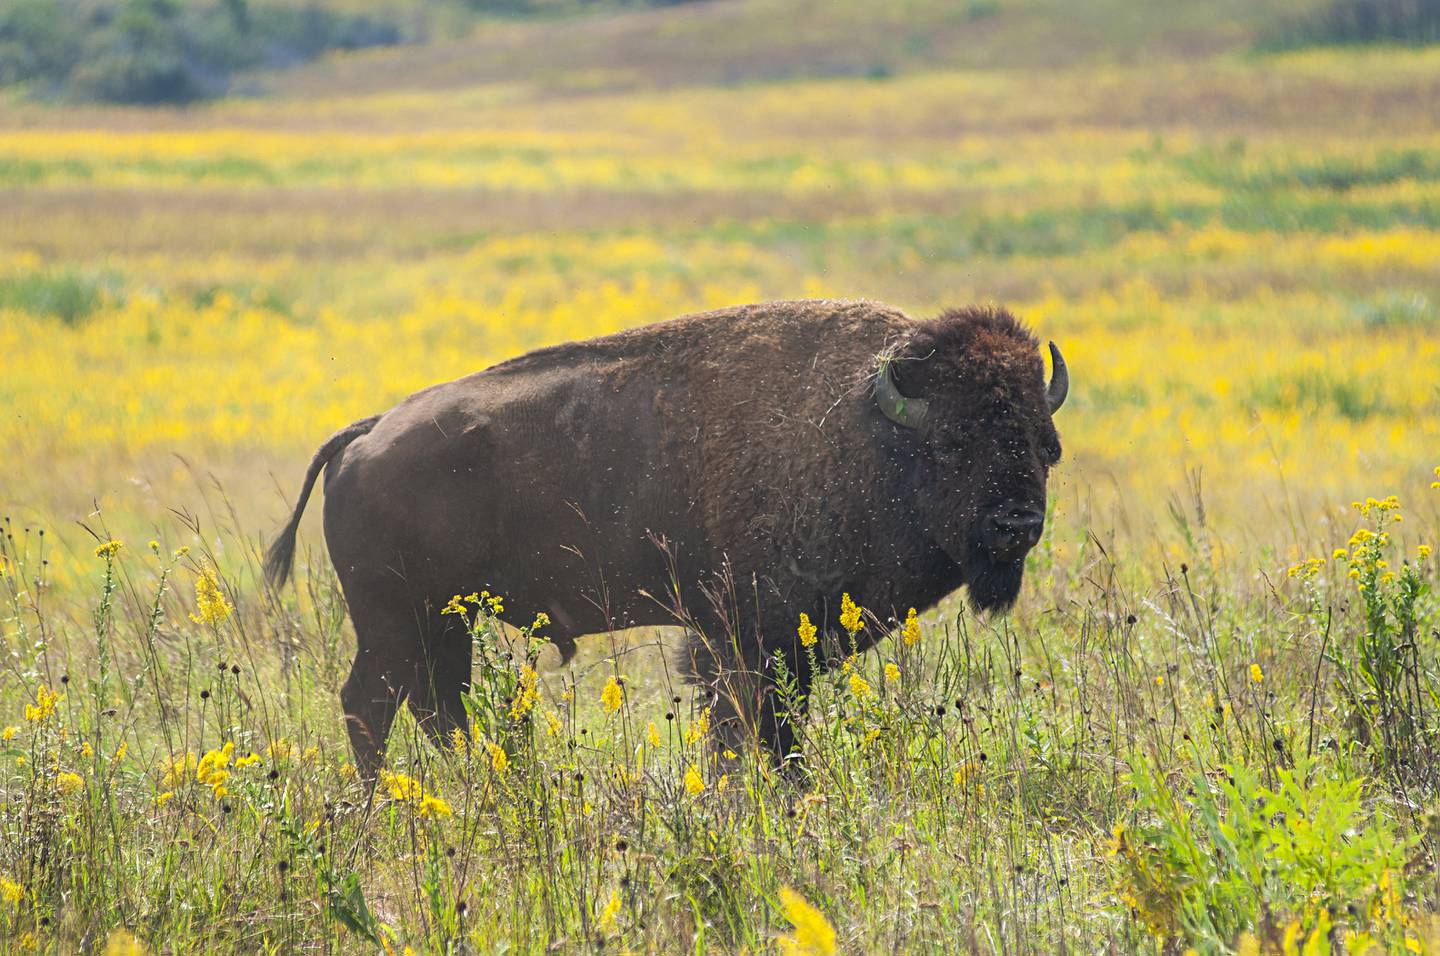 A male bison stands guard for the herd at the Nachusa Grasslands on Saturday. The natural area held its annual Autumn on the Prairie on Saturday, offering hikes, educational opportunities and wagon tours of the area.